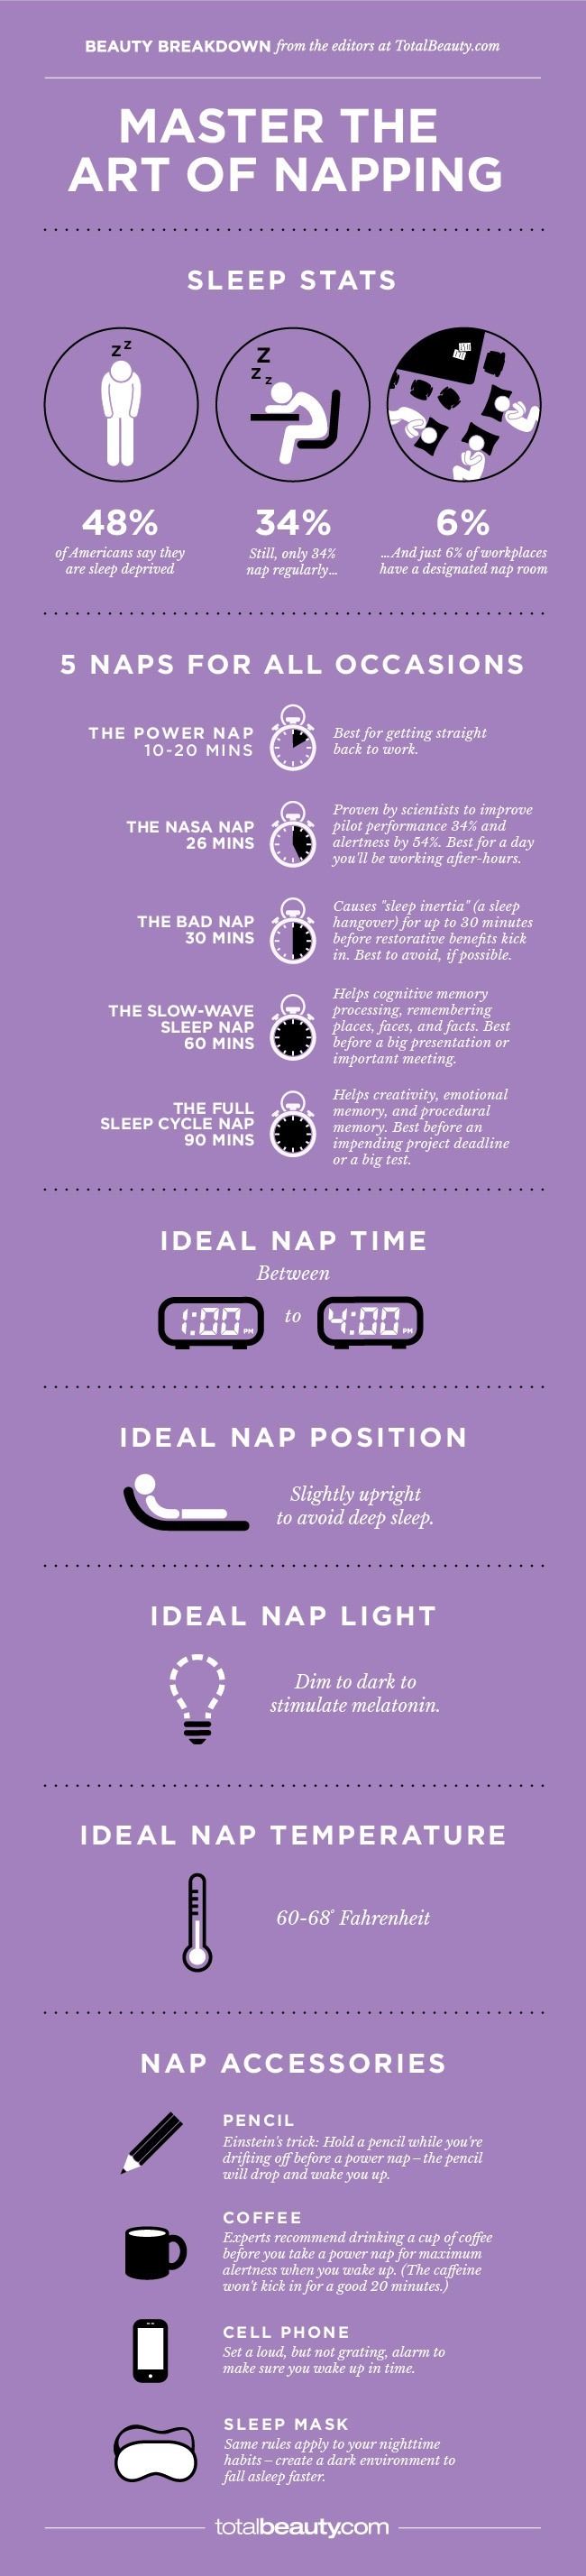 Master the Art of Napping